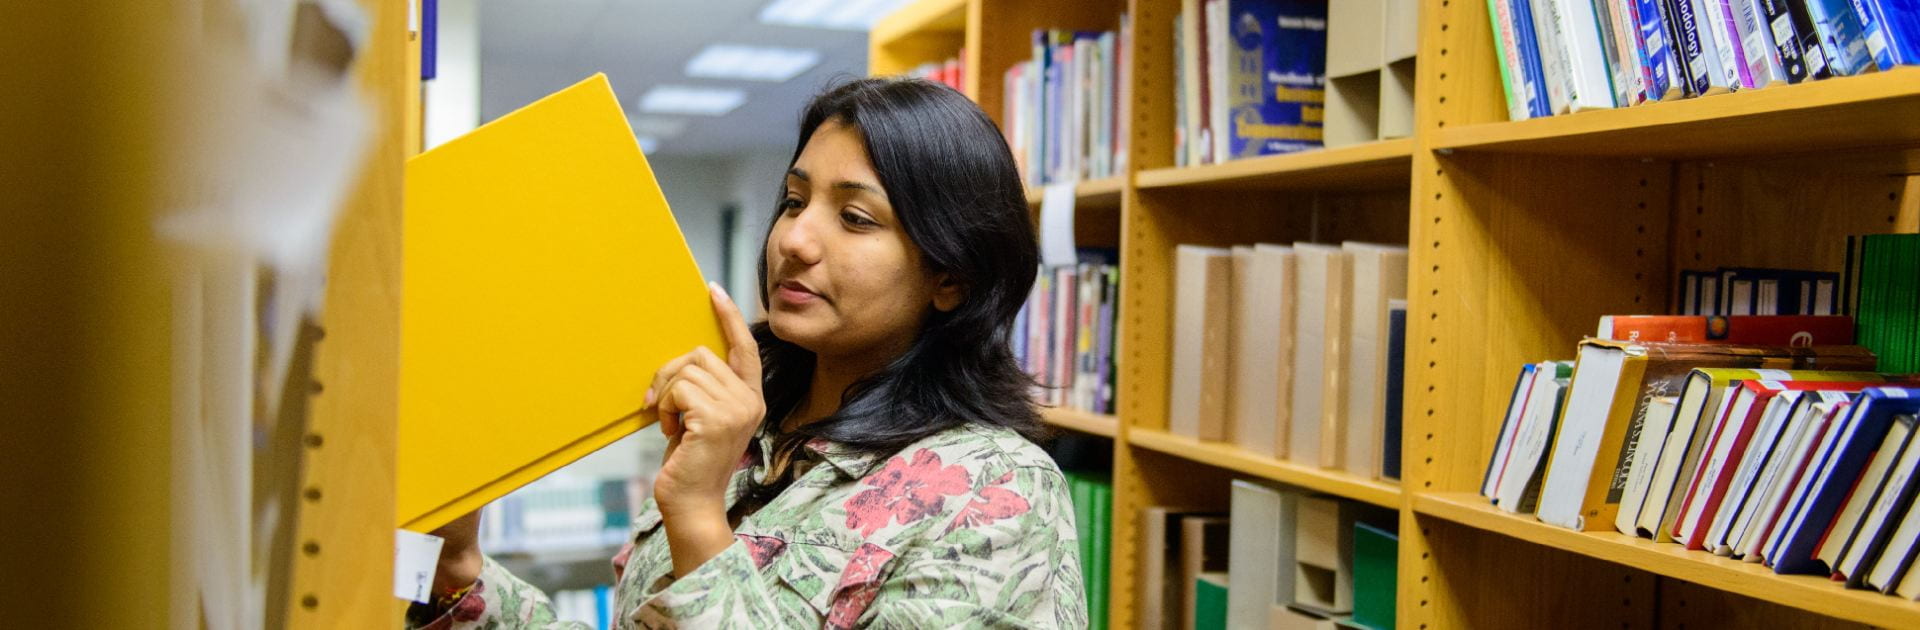 A woman removing a yellow book from a library bookshelf